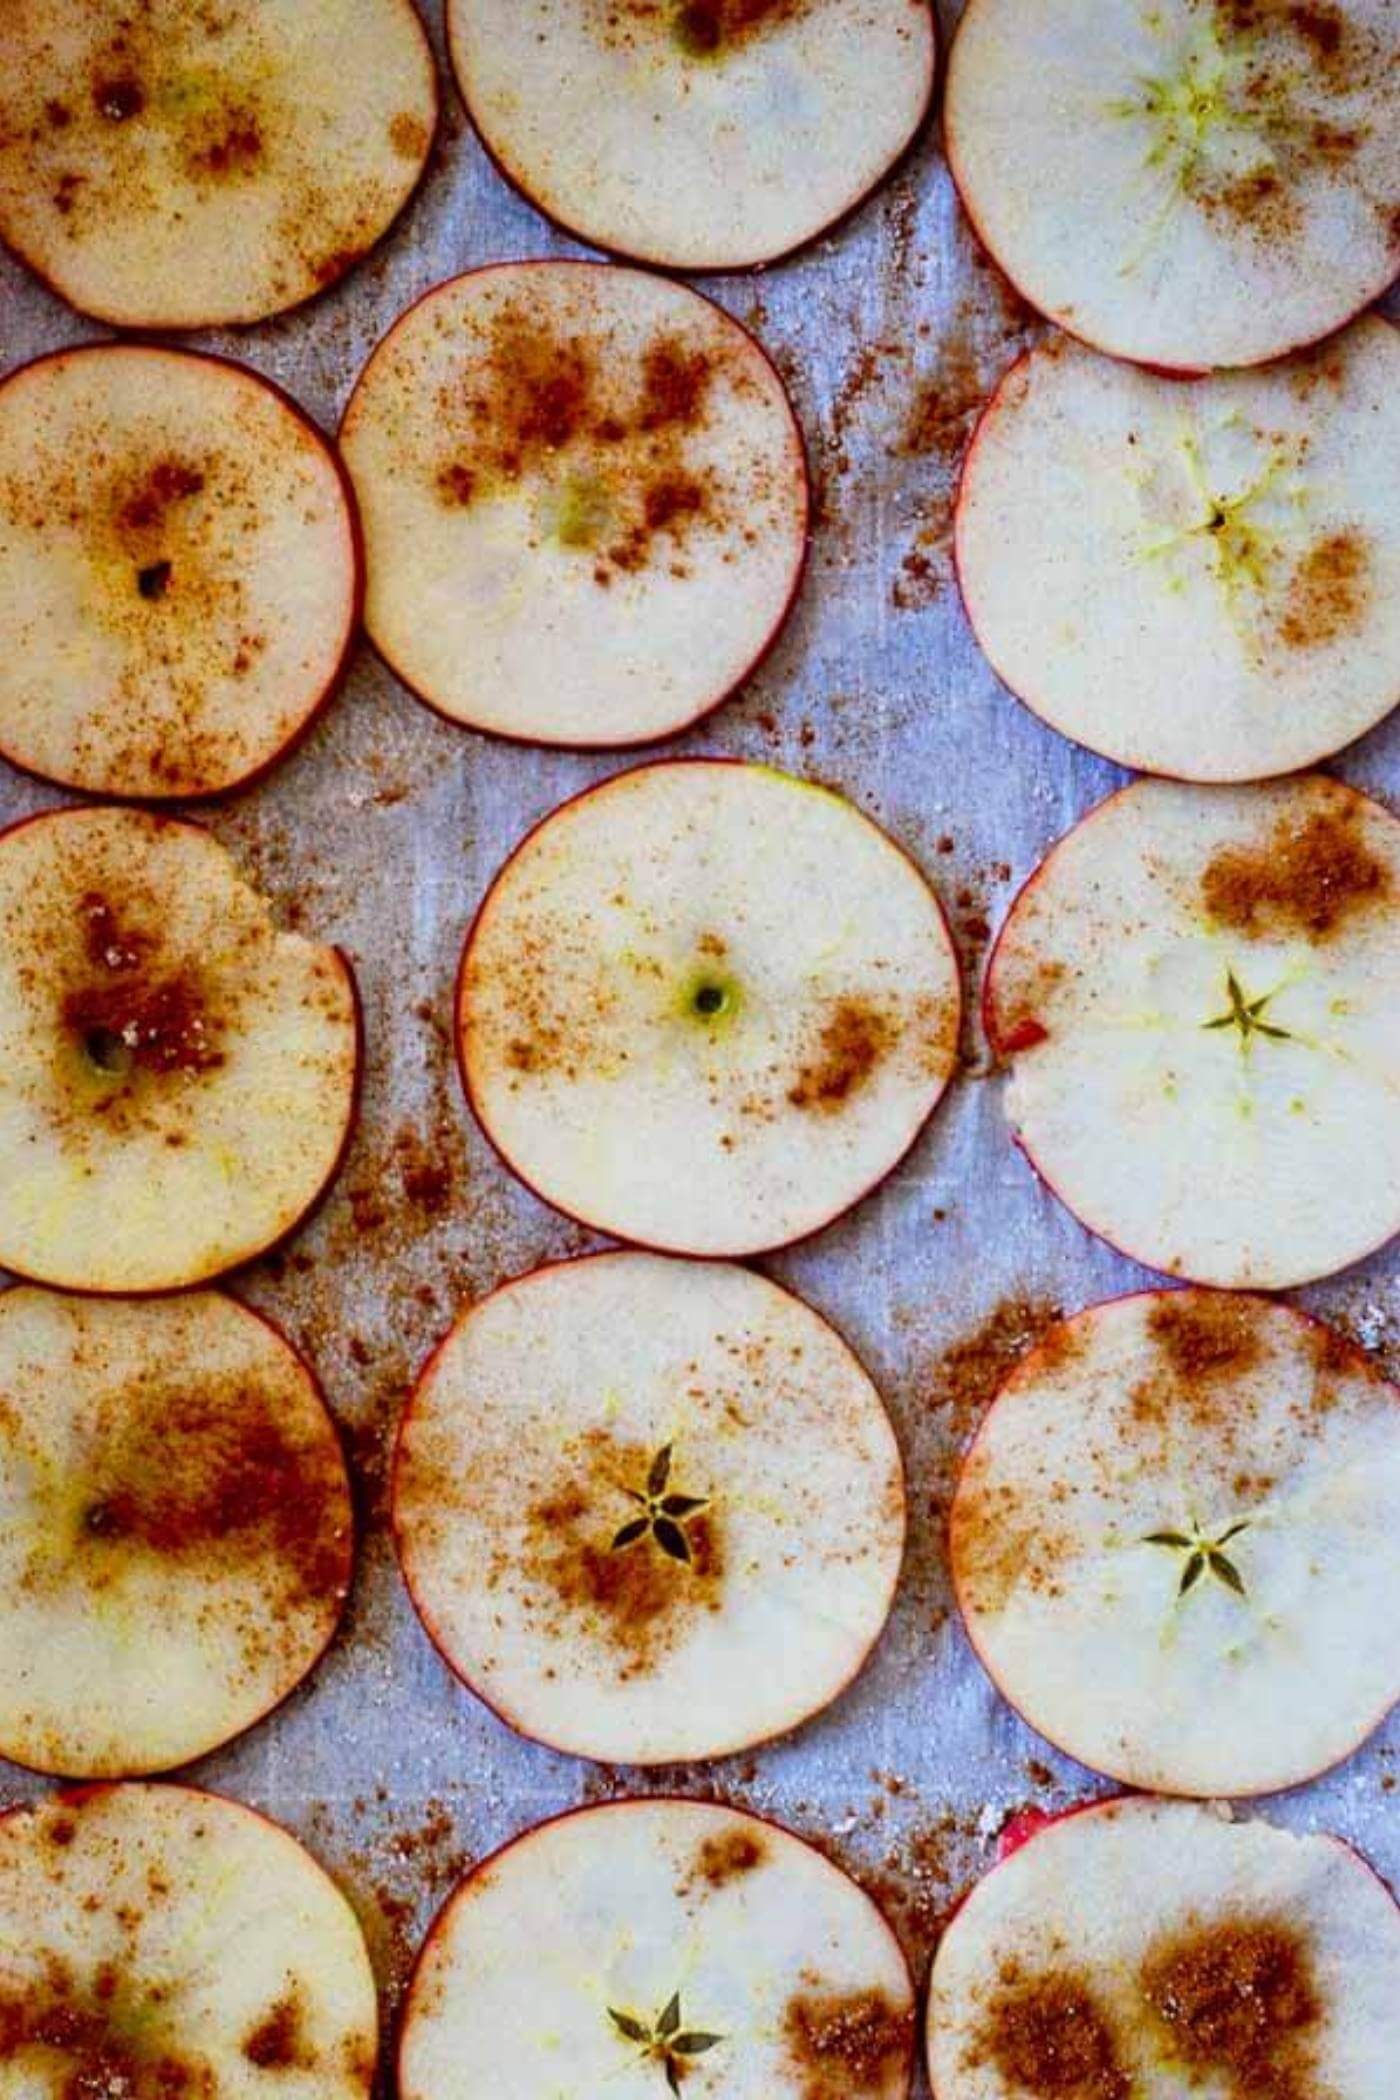 apple slices ready for baking.